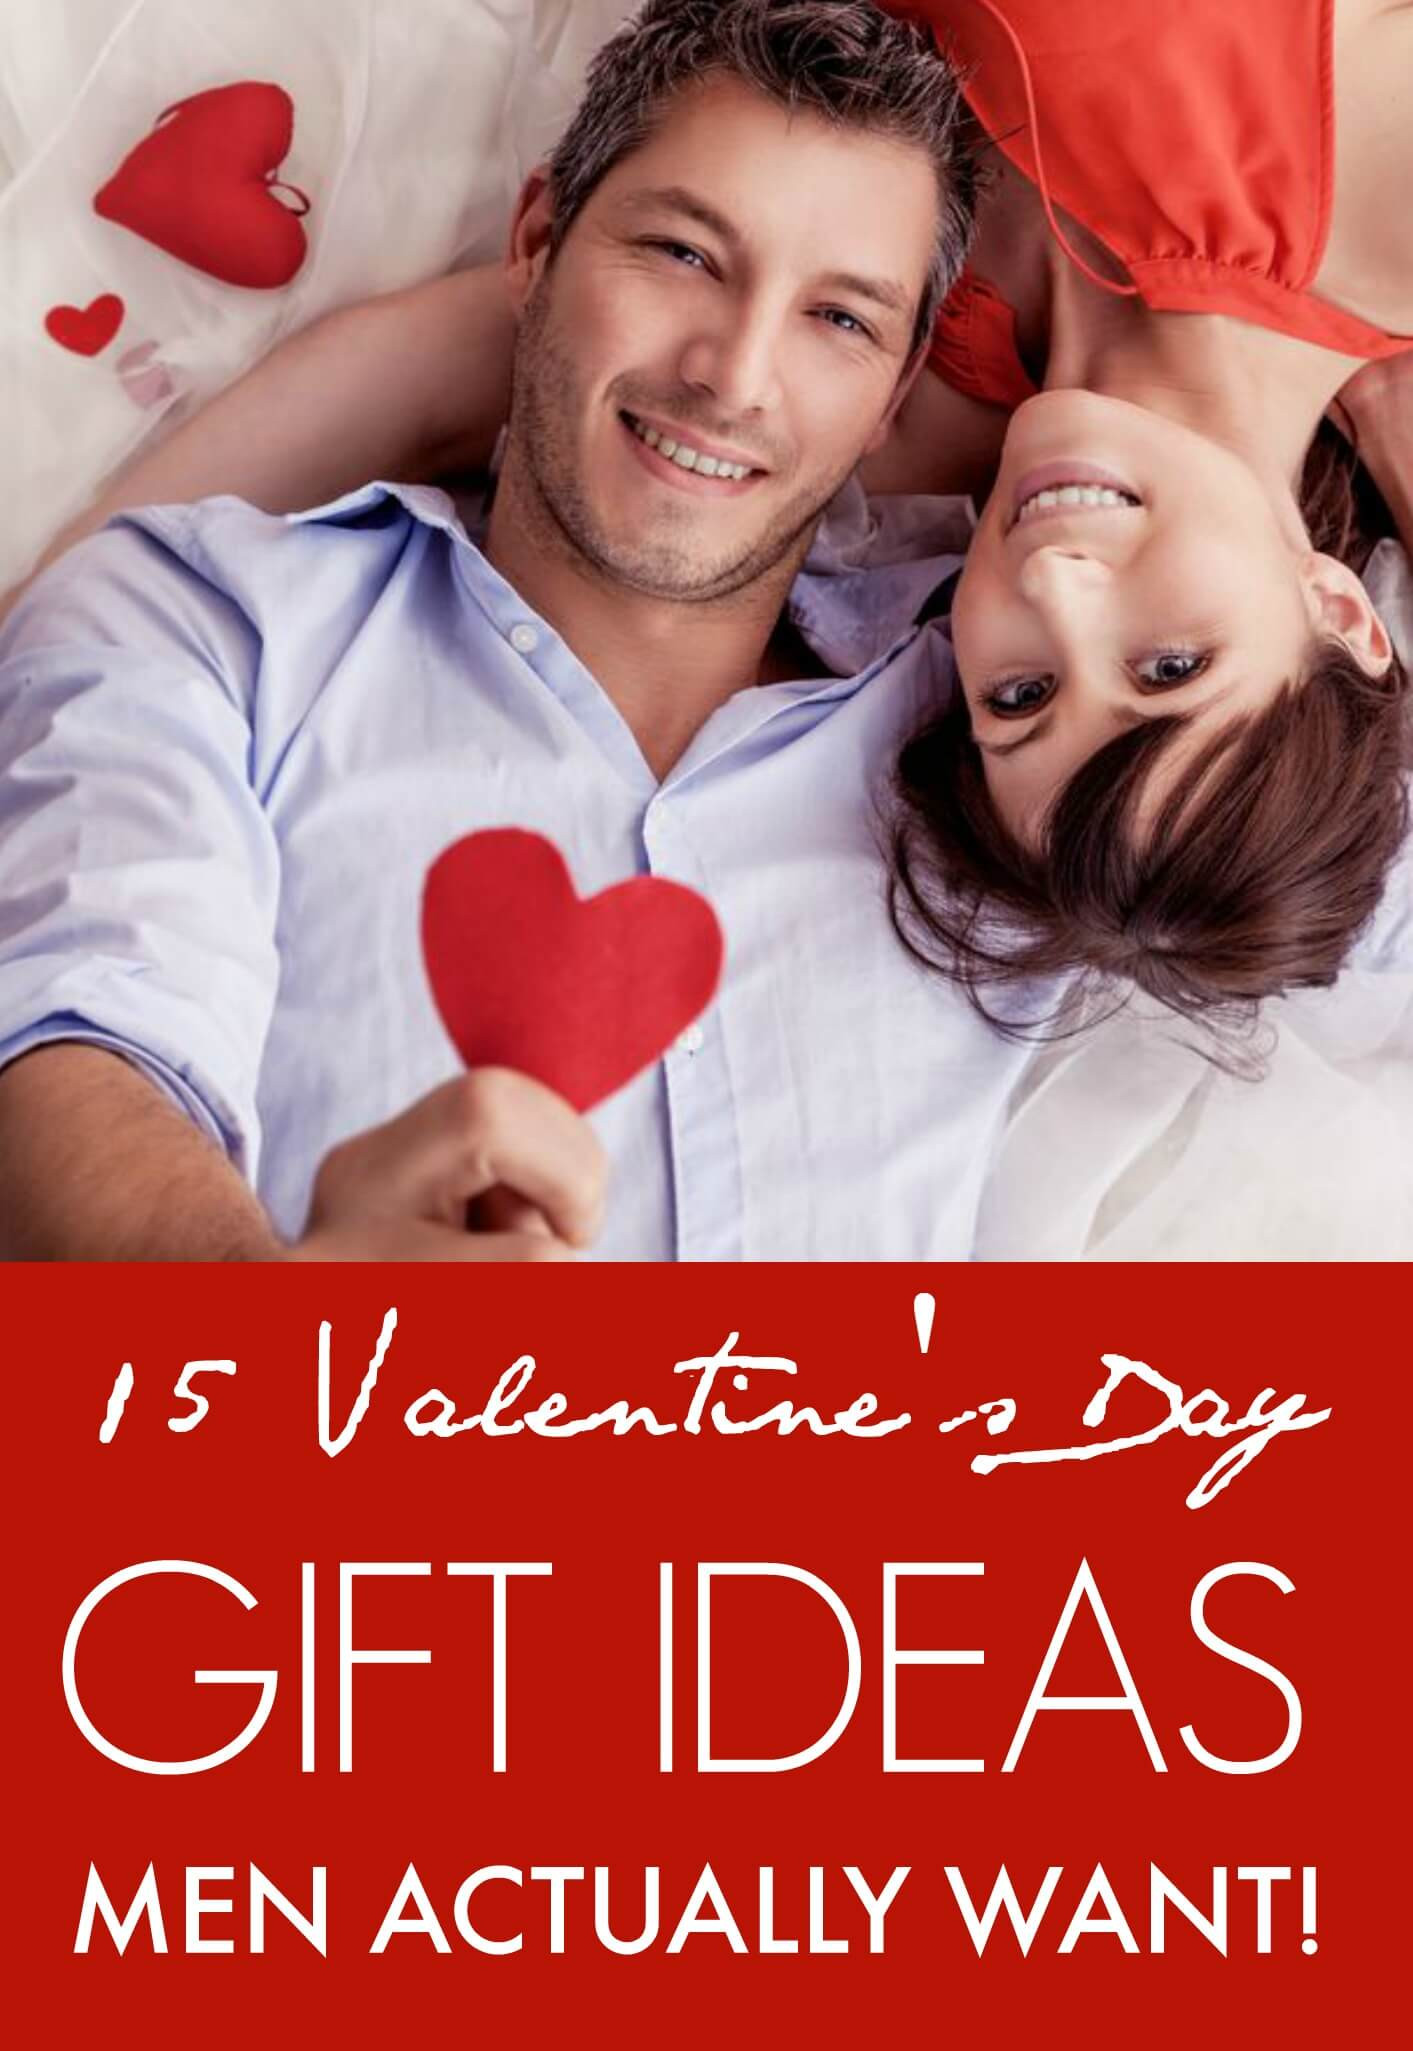 Gift Ideas Valentines Day Men
 15 Valentine’s Day Gift ideas Men Actually Want